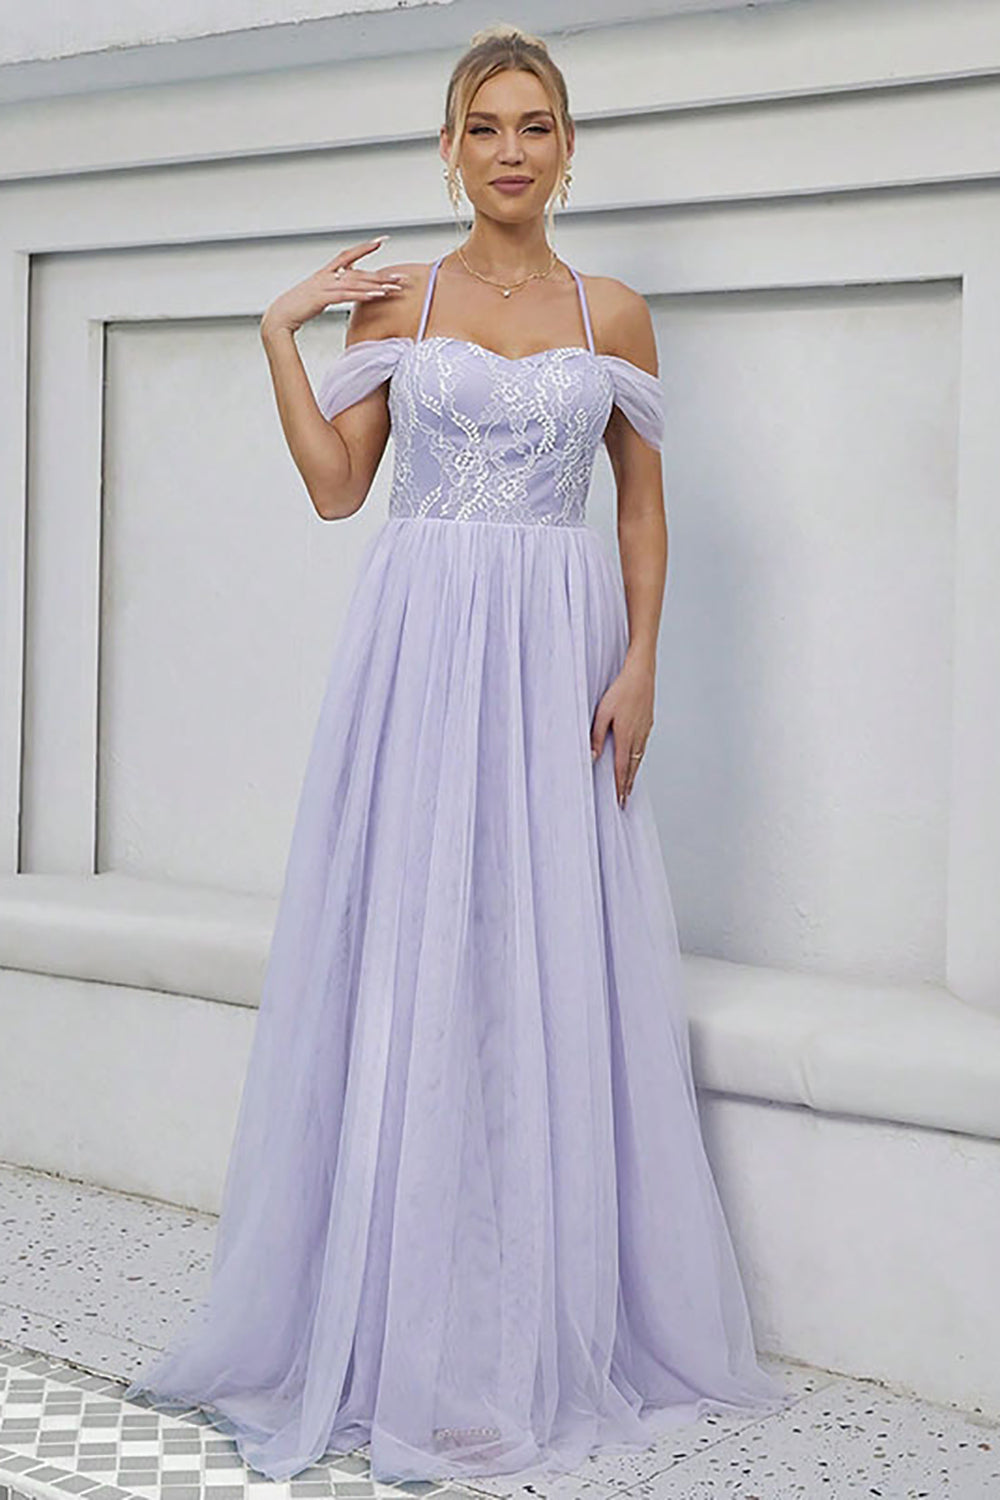 Tulle A-Line Lilac Long Formal Dress